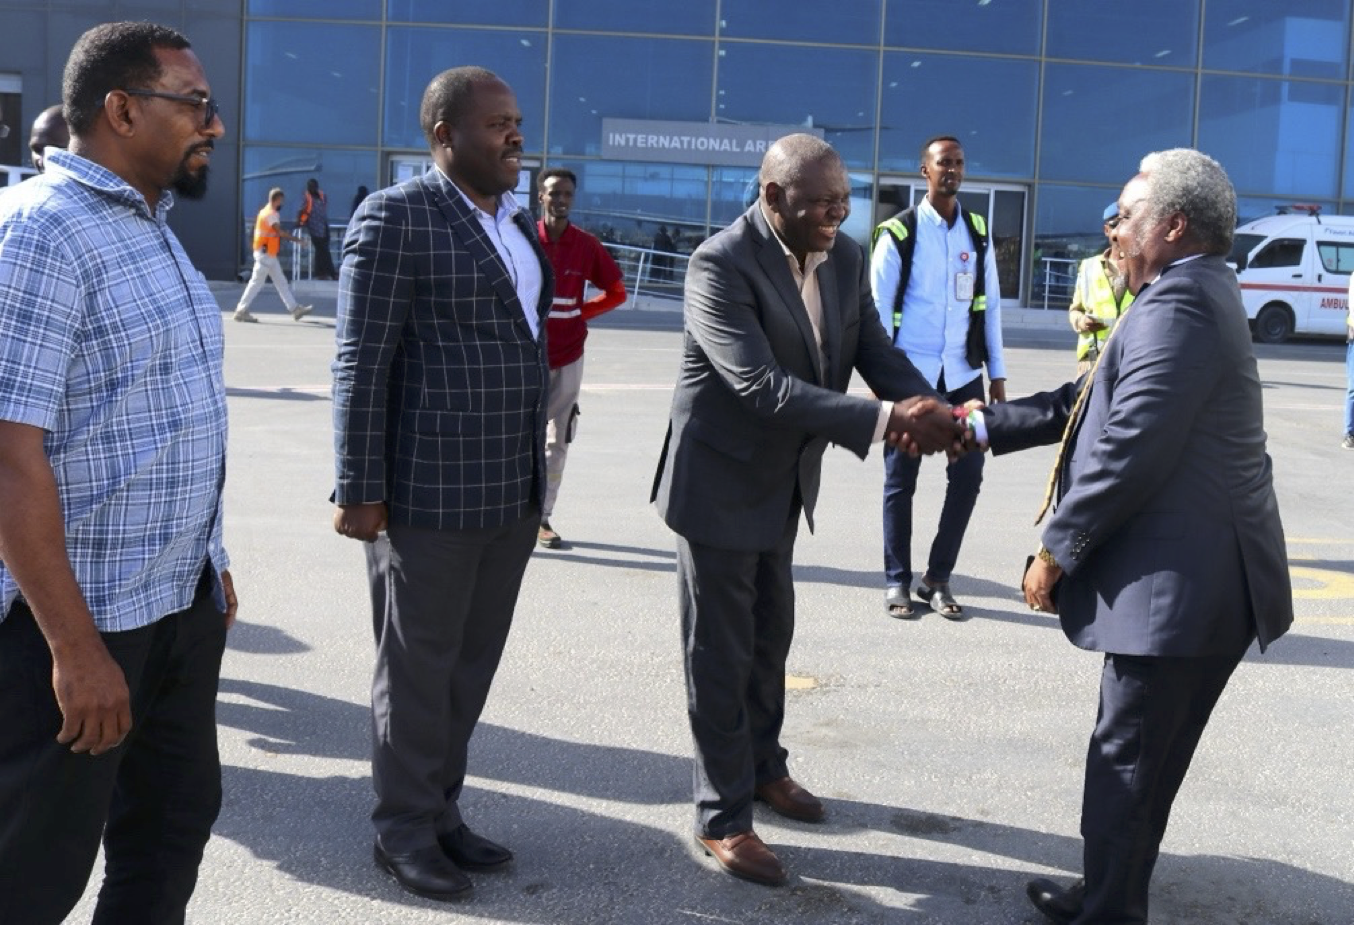 Arrival of the Head of Mission to Somalia